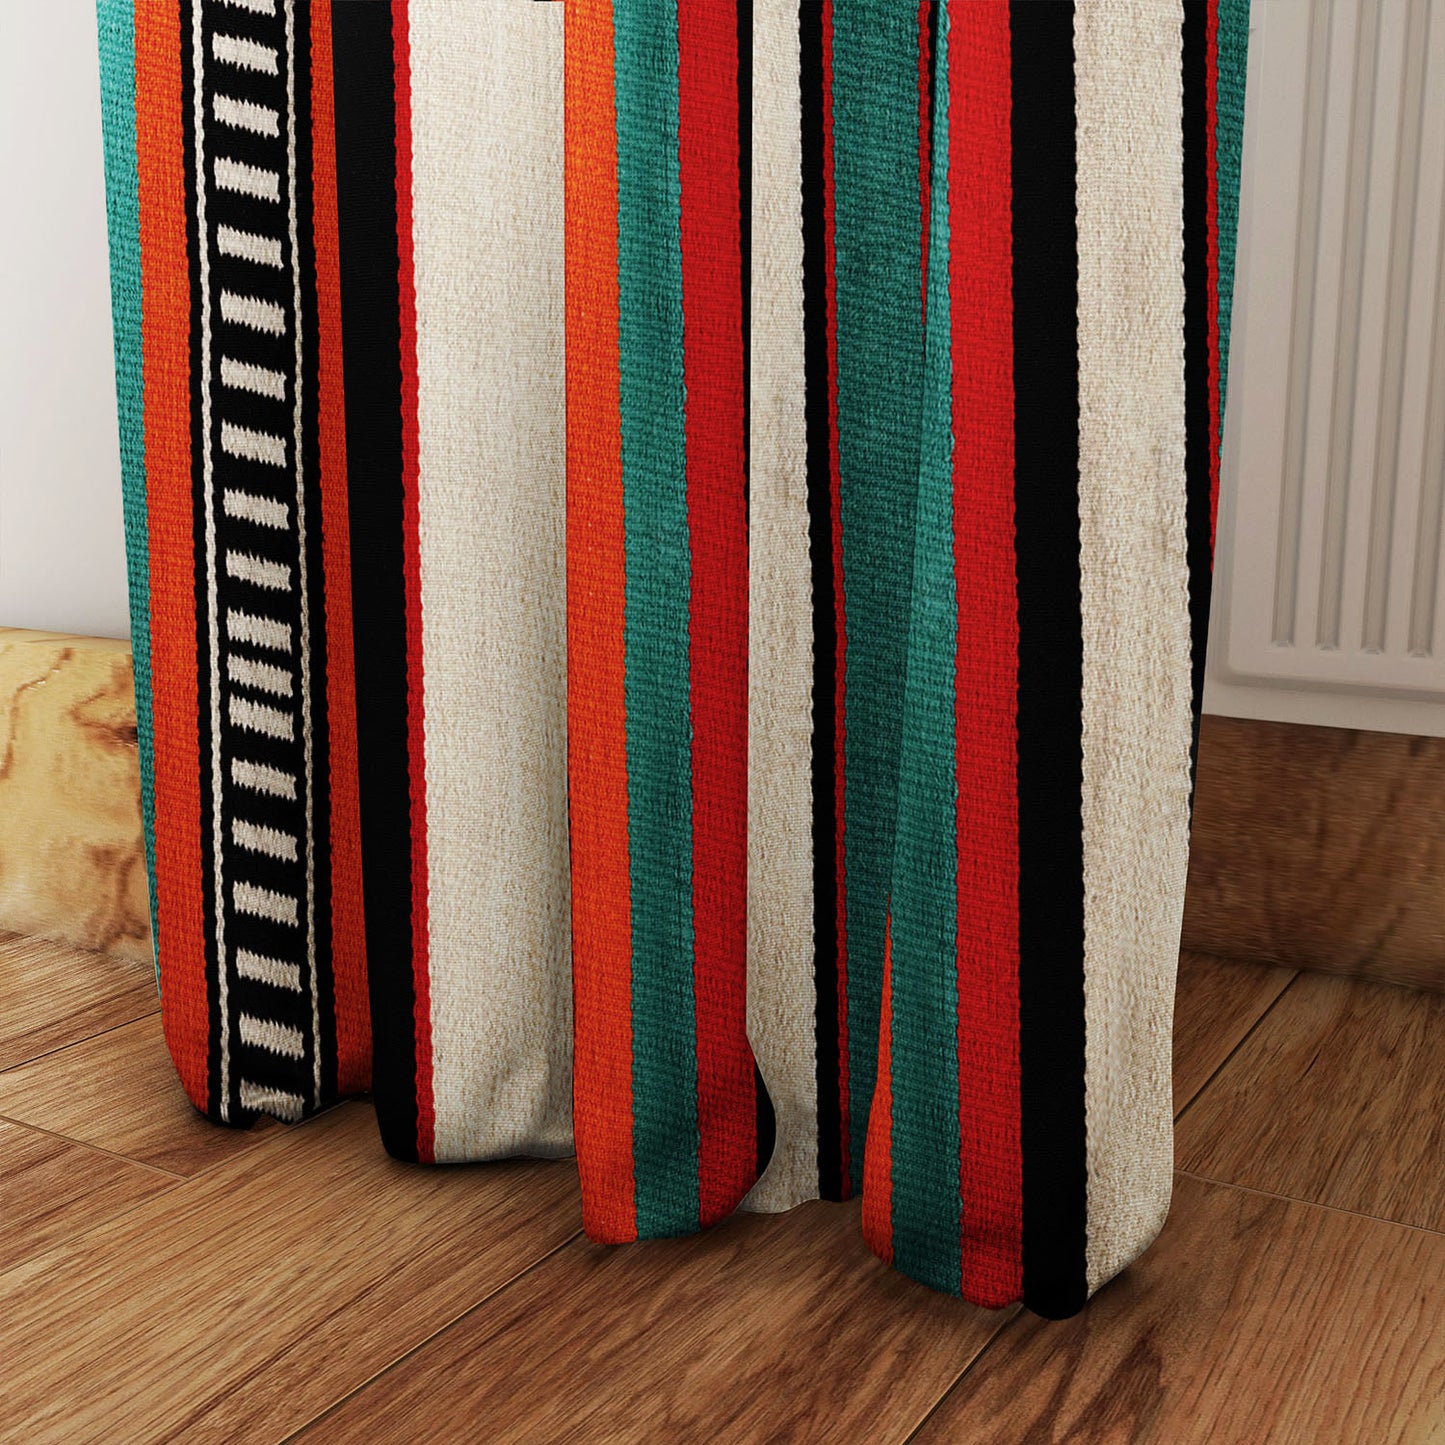 Modern Bohemian Curtains with Blackout in Colorful Ethnic Stripes - Red